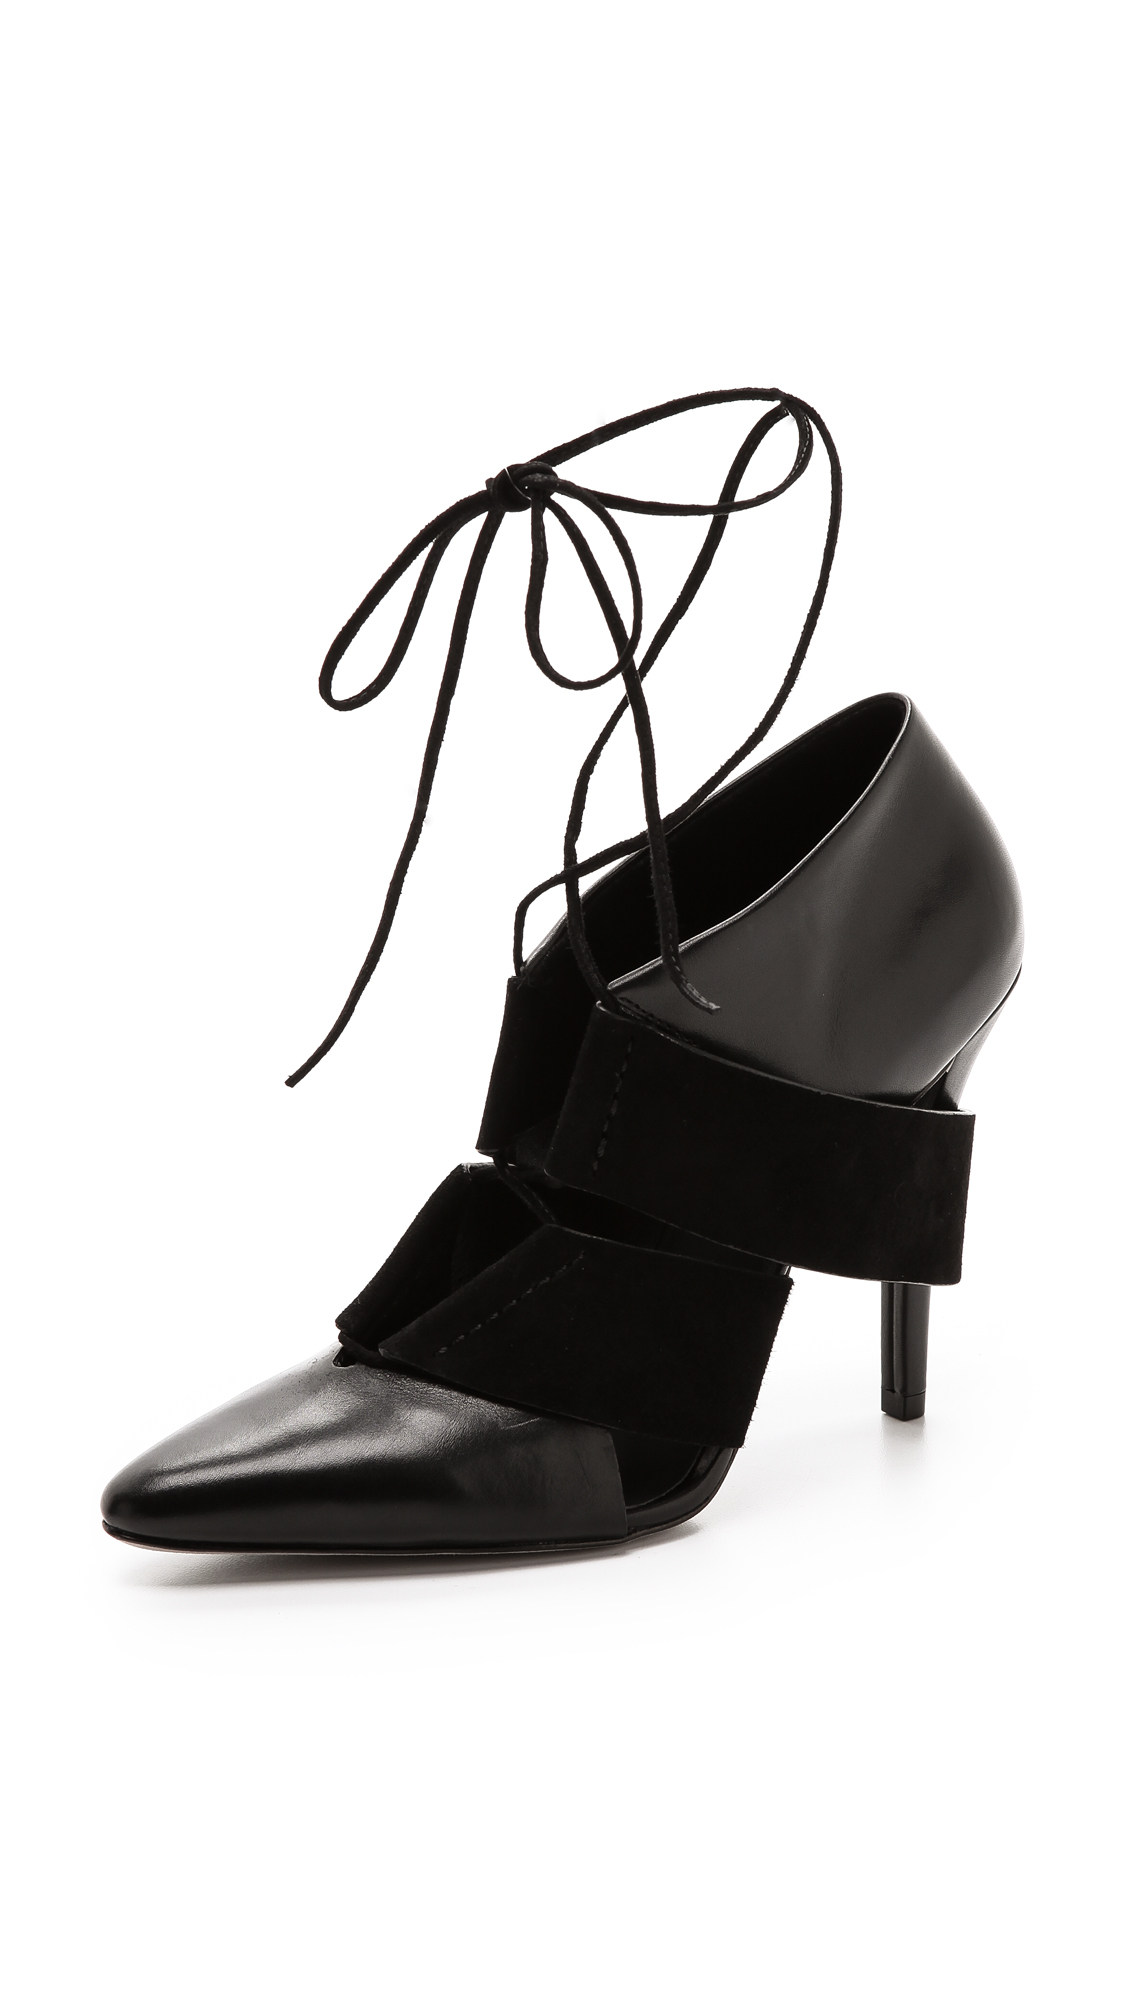 Lyst - Alexander wang Mila Lace Up Booties in Black